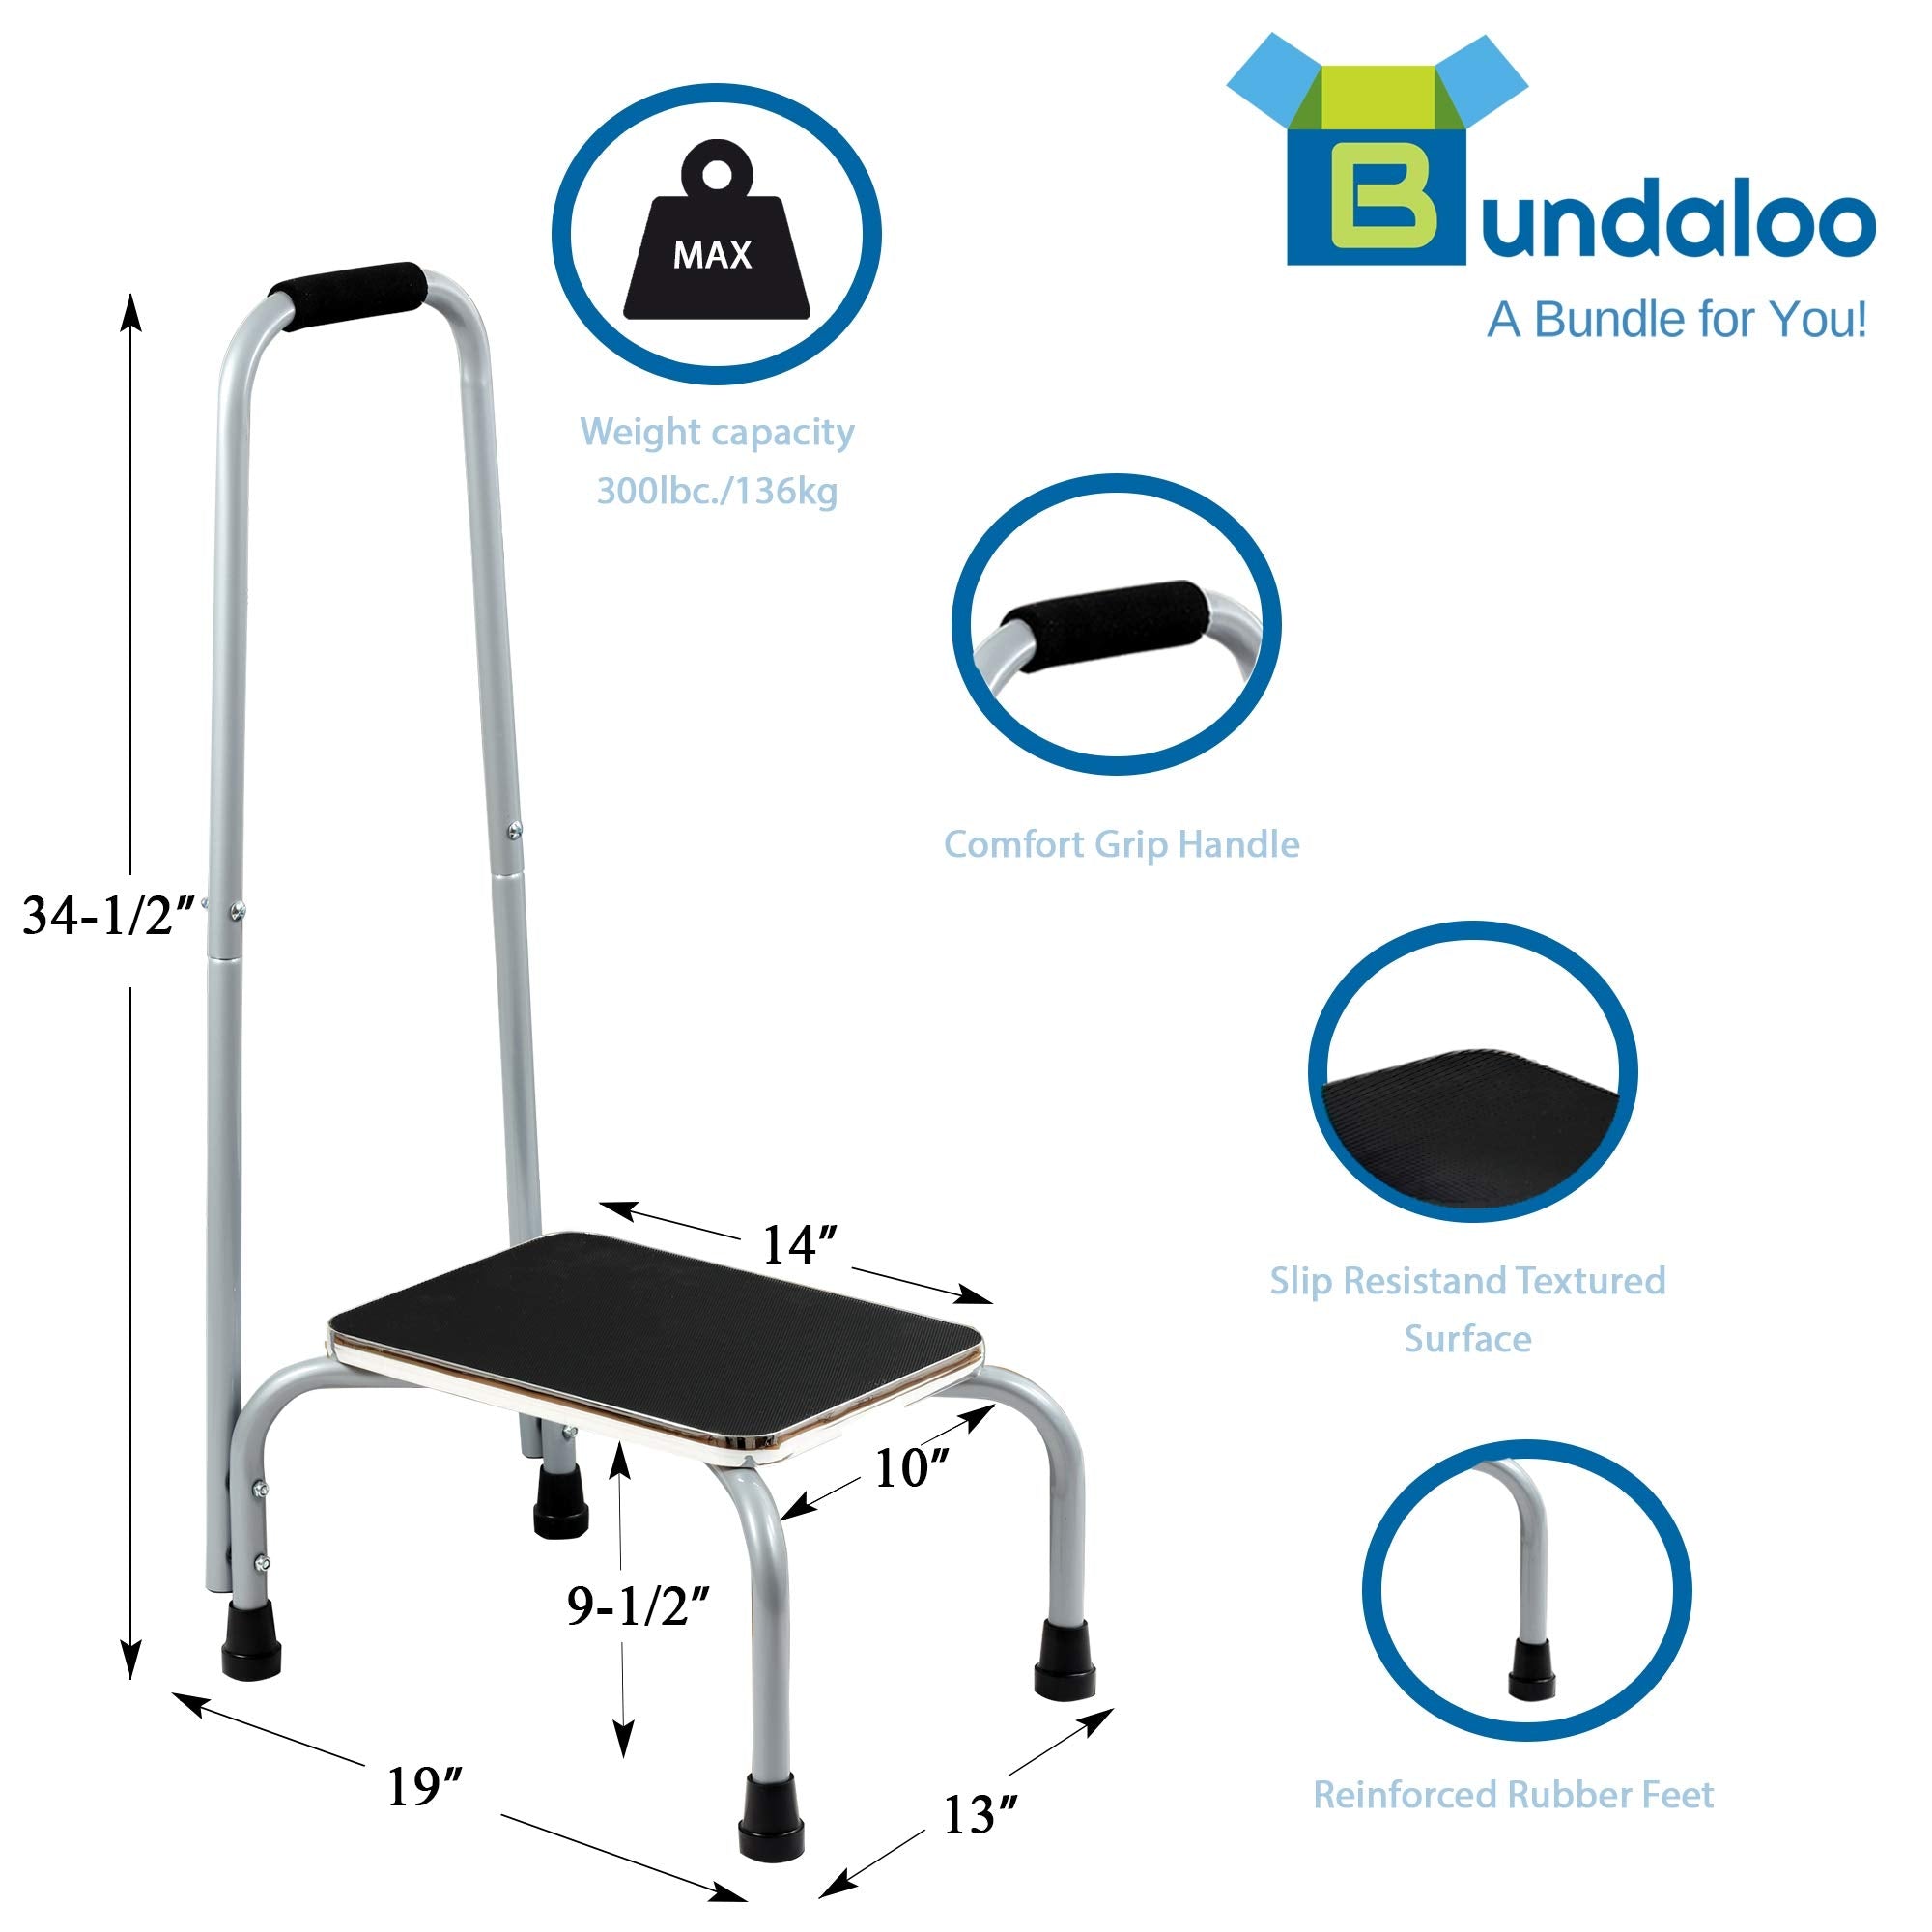 Bundaloo Support Step Stool | Best Foot Stool for Hospital Bed, Kitchen Shelving, & Bath Tub | Non-Slip Rubber Handle, Platform, & Feet for Extra Safety | for Adults & Kids in Home or Medical Setting  - Very Good